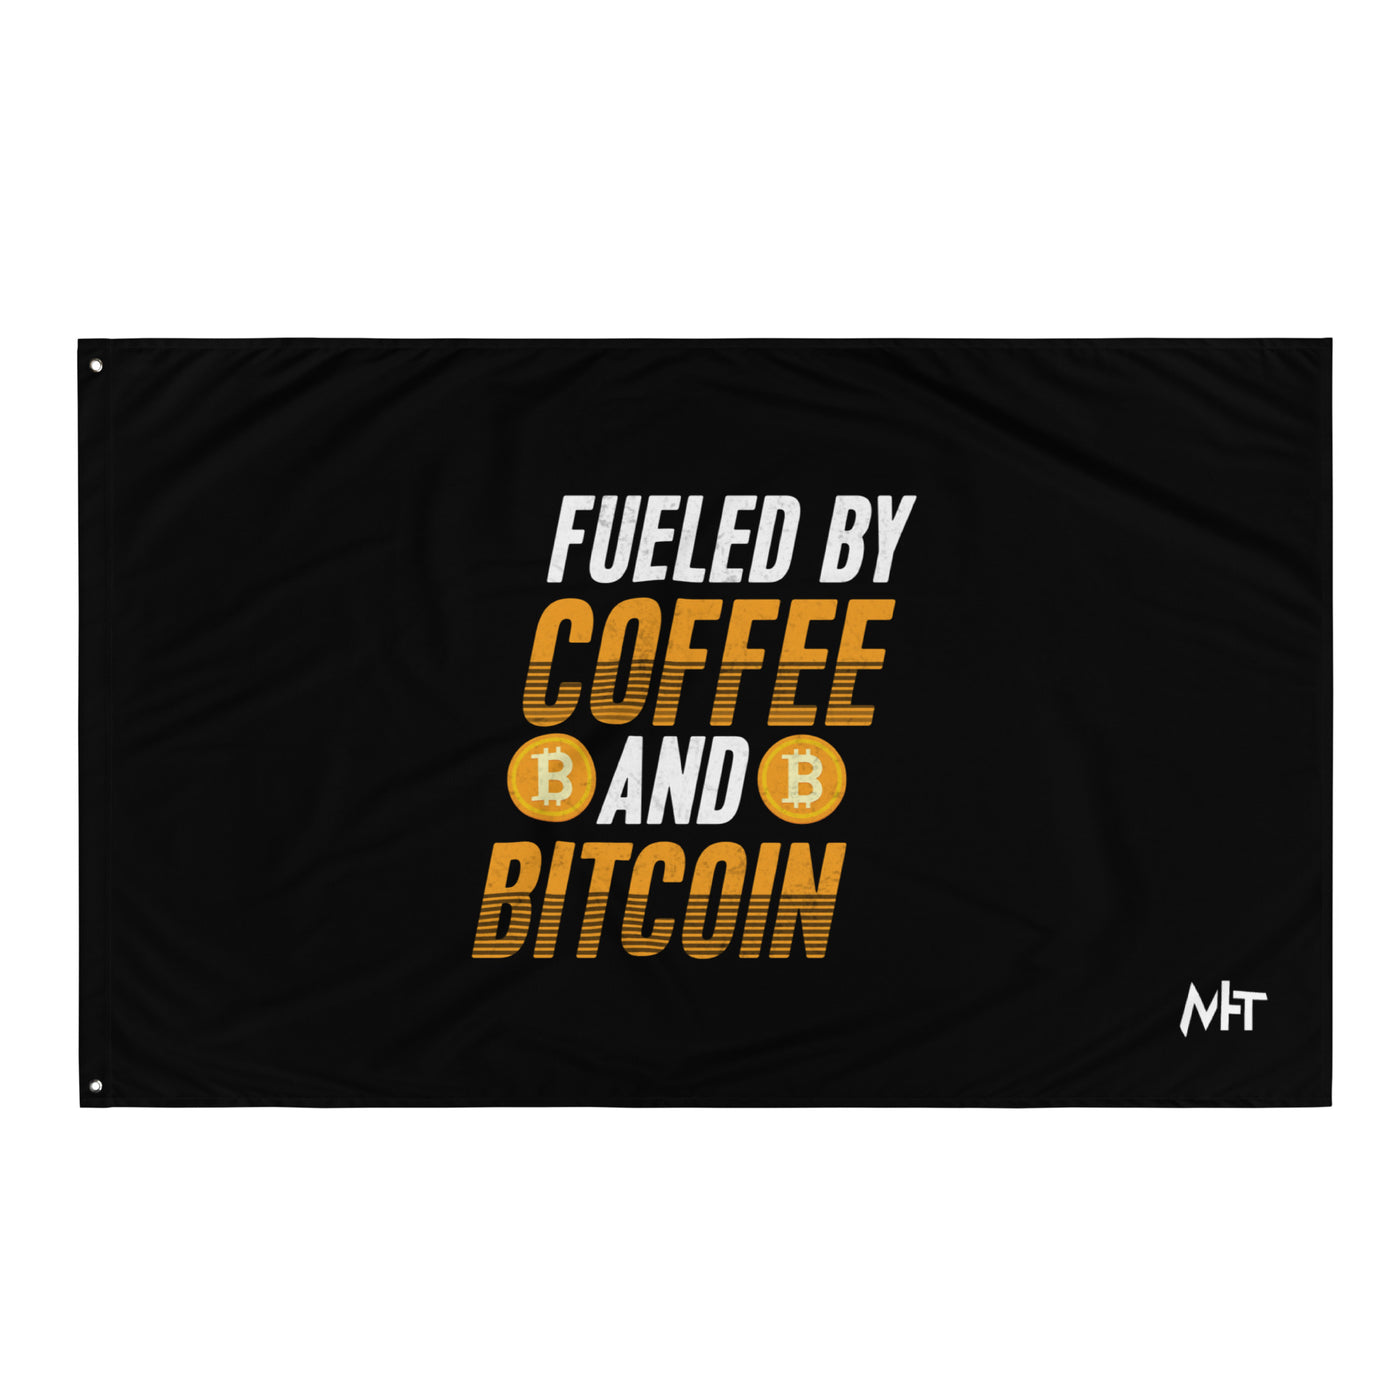 Fueled by Coffee and Bitcoin - Flag